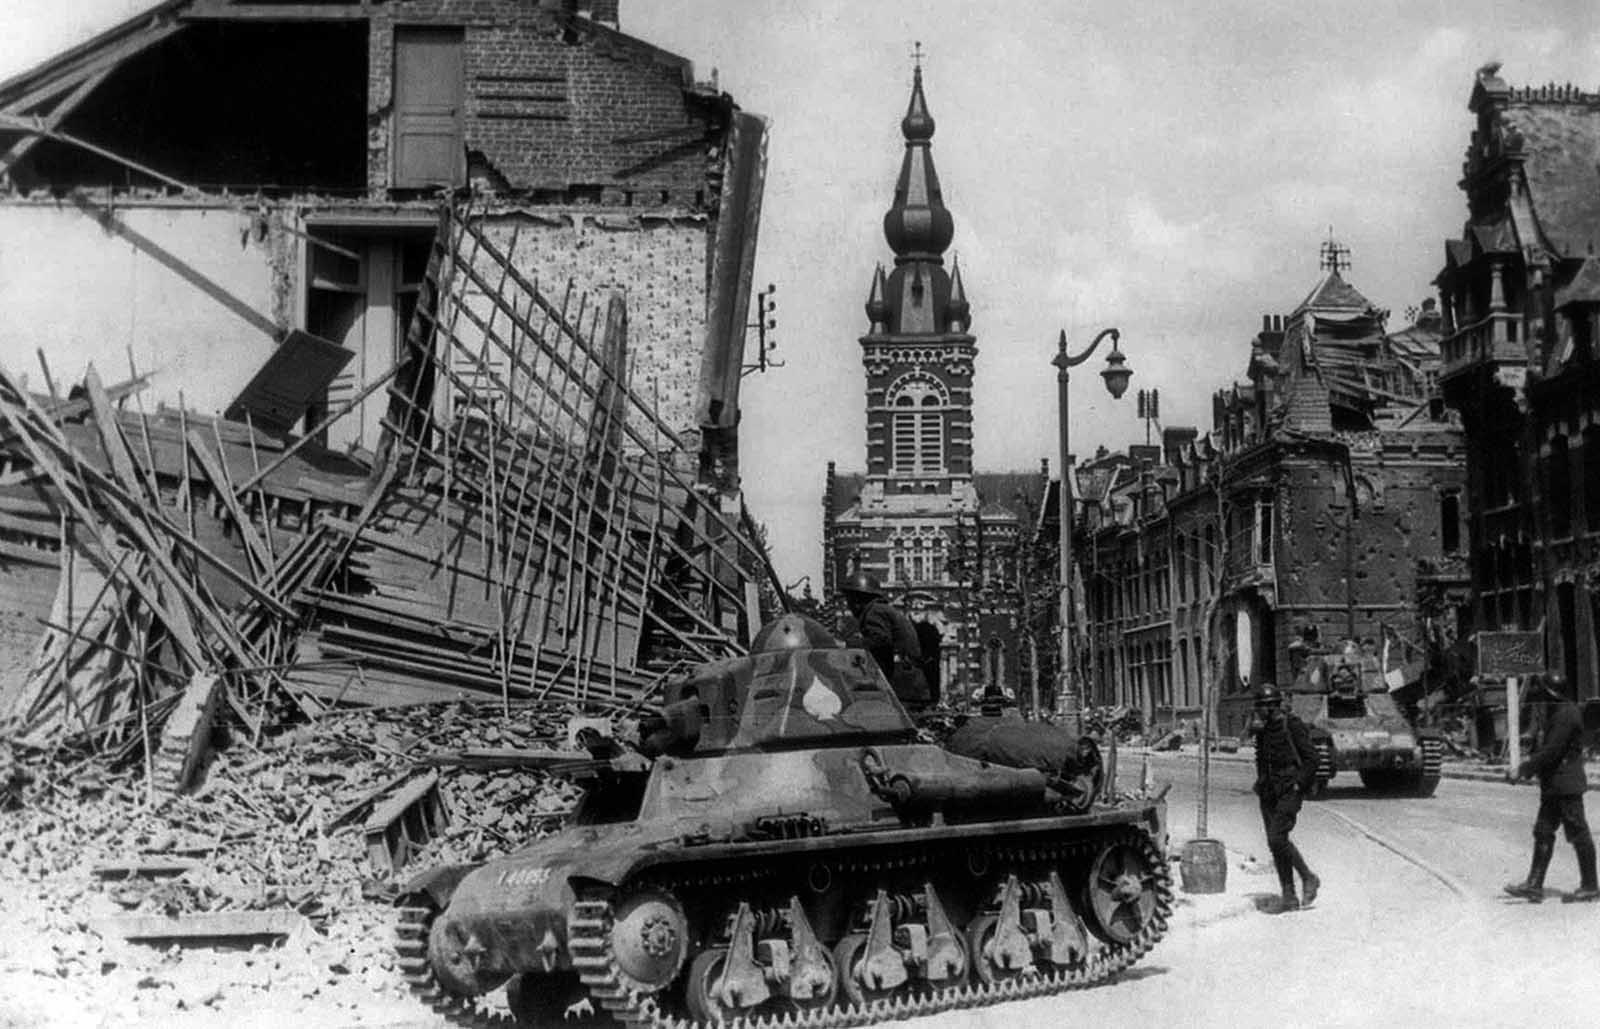 French tanks pass through a bombarded French town on their way to the front line in France, on May 25, 1940.